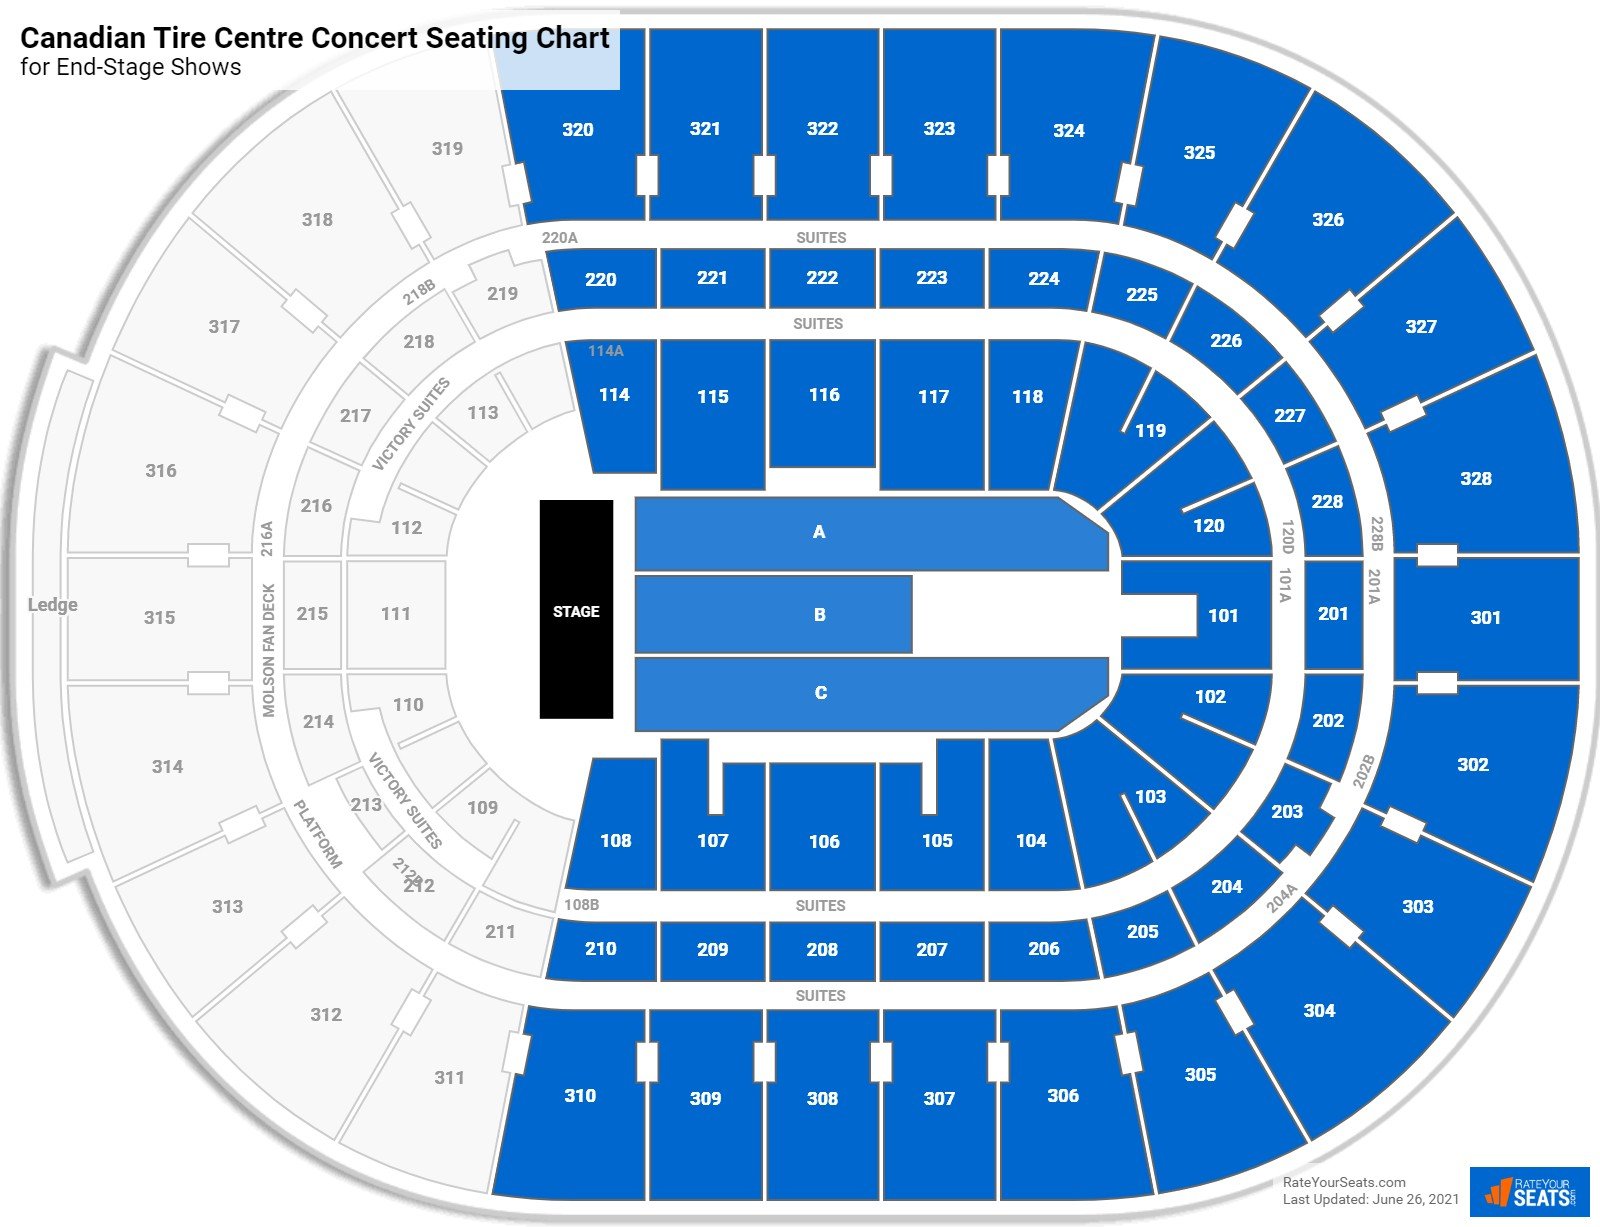 Canadian Tire Centre Concert Seating Chart